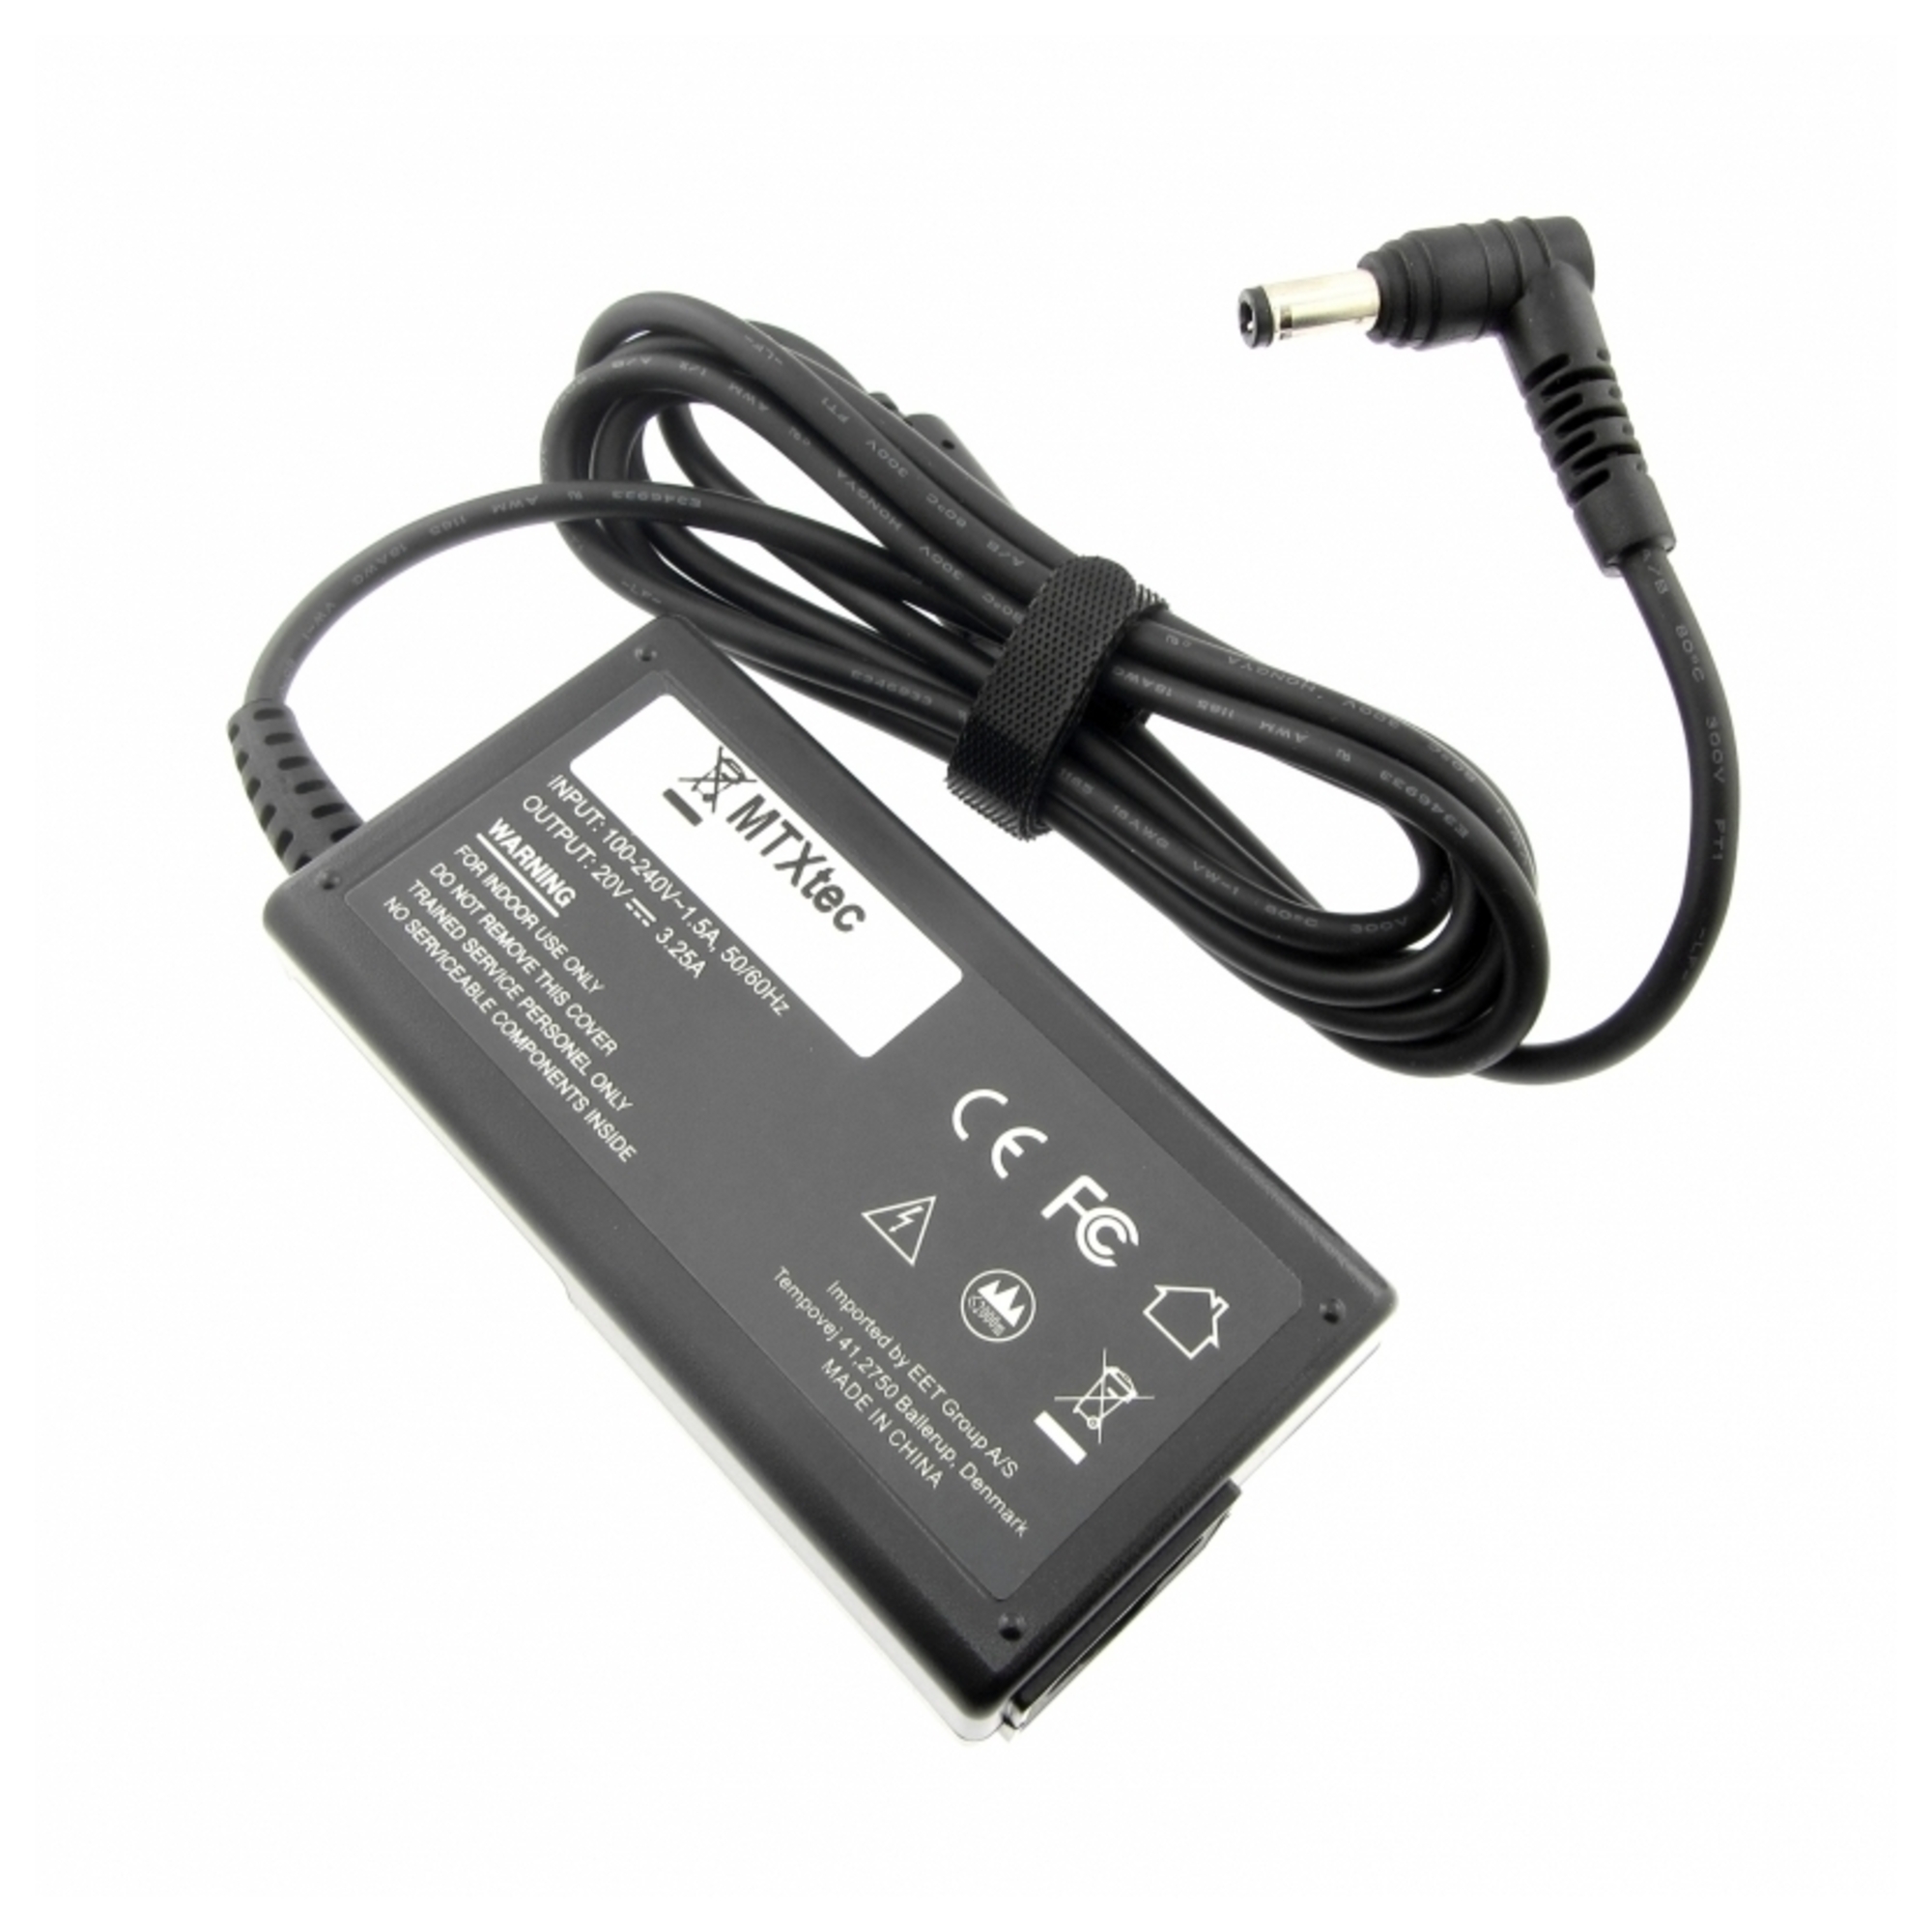 mtxtec charger (power supply), 20.0v, 3.25a for targa visionary 1900, plug 5.5 x 2.5 mm round - neuf